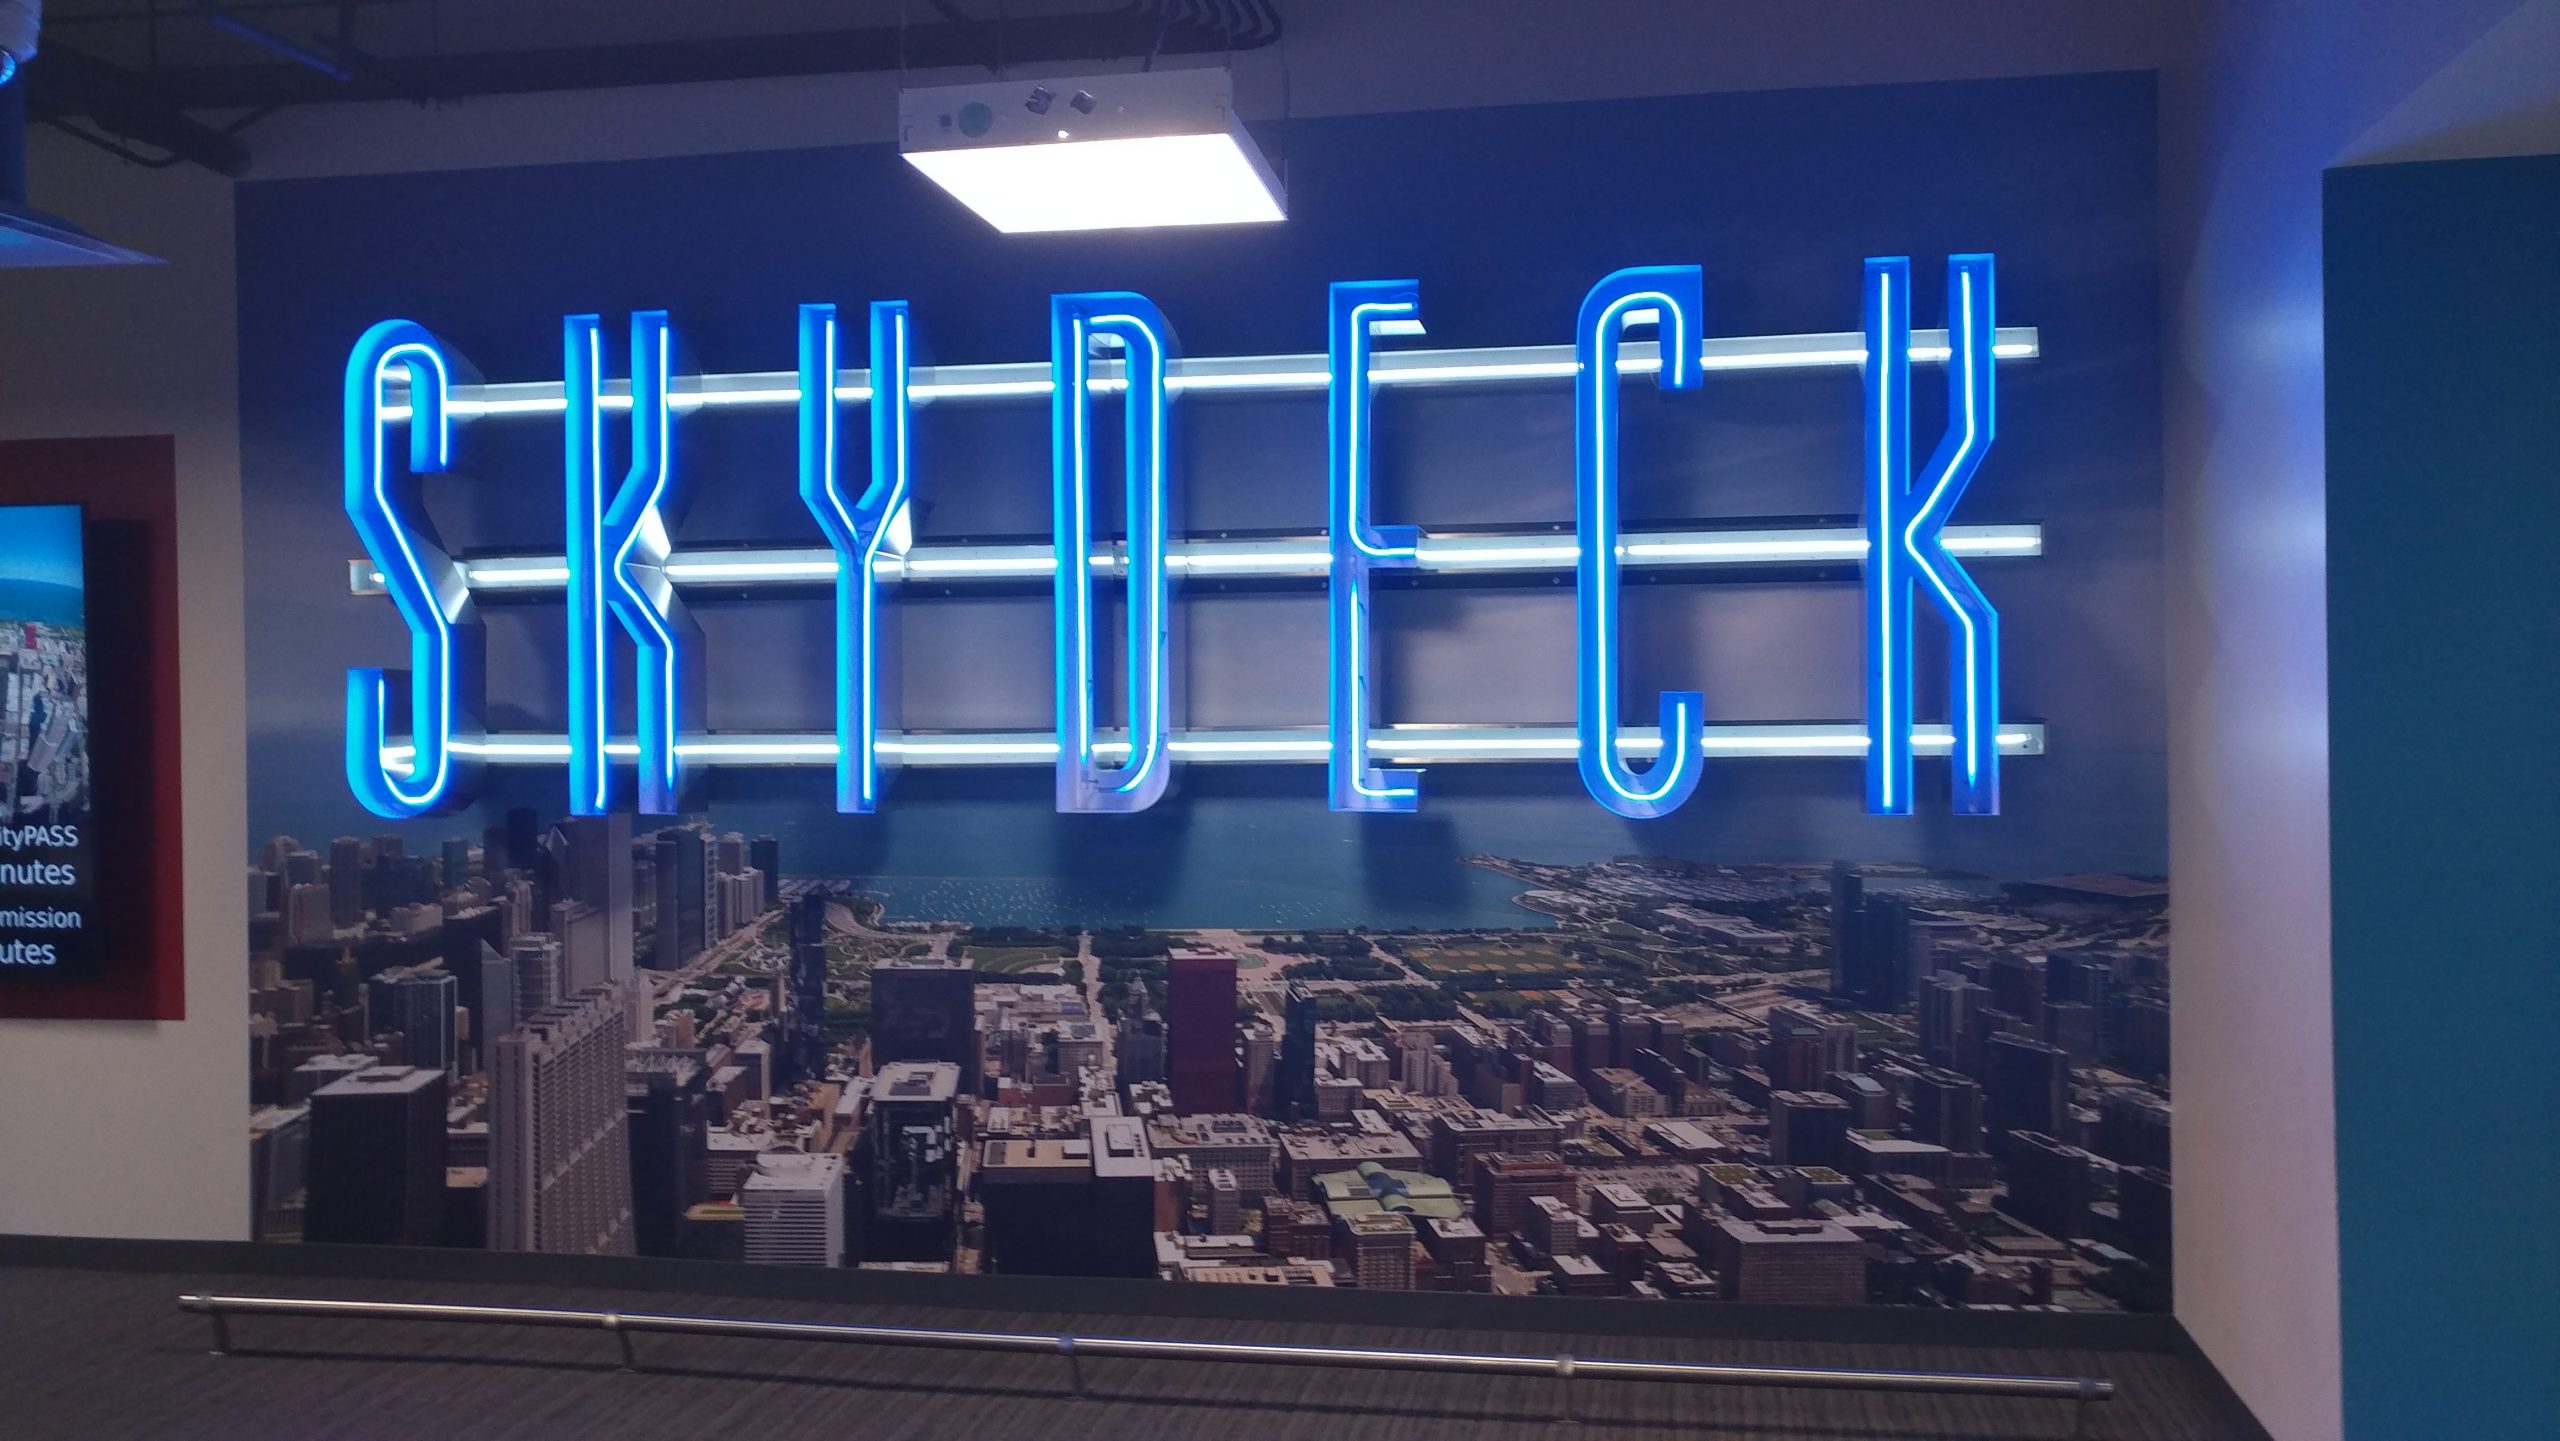 Illuminated signage that says skydeck in blue